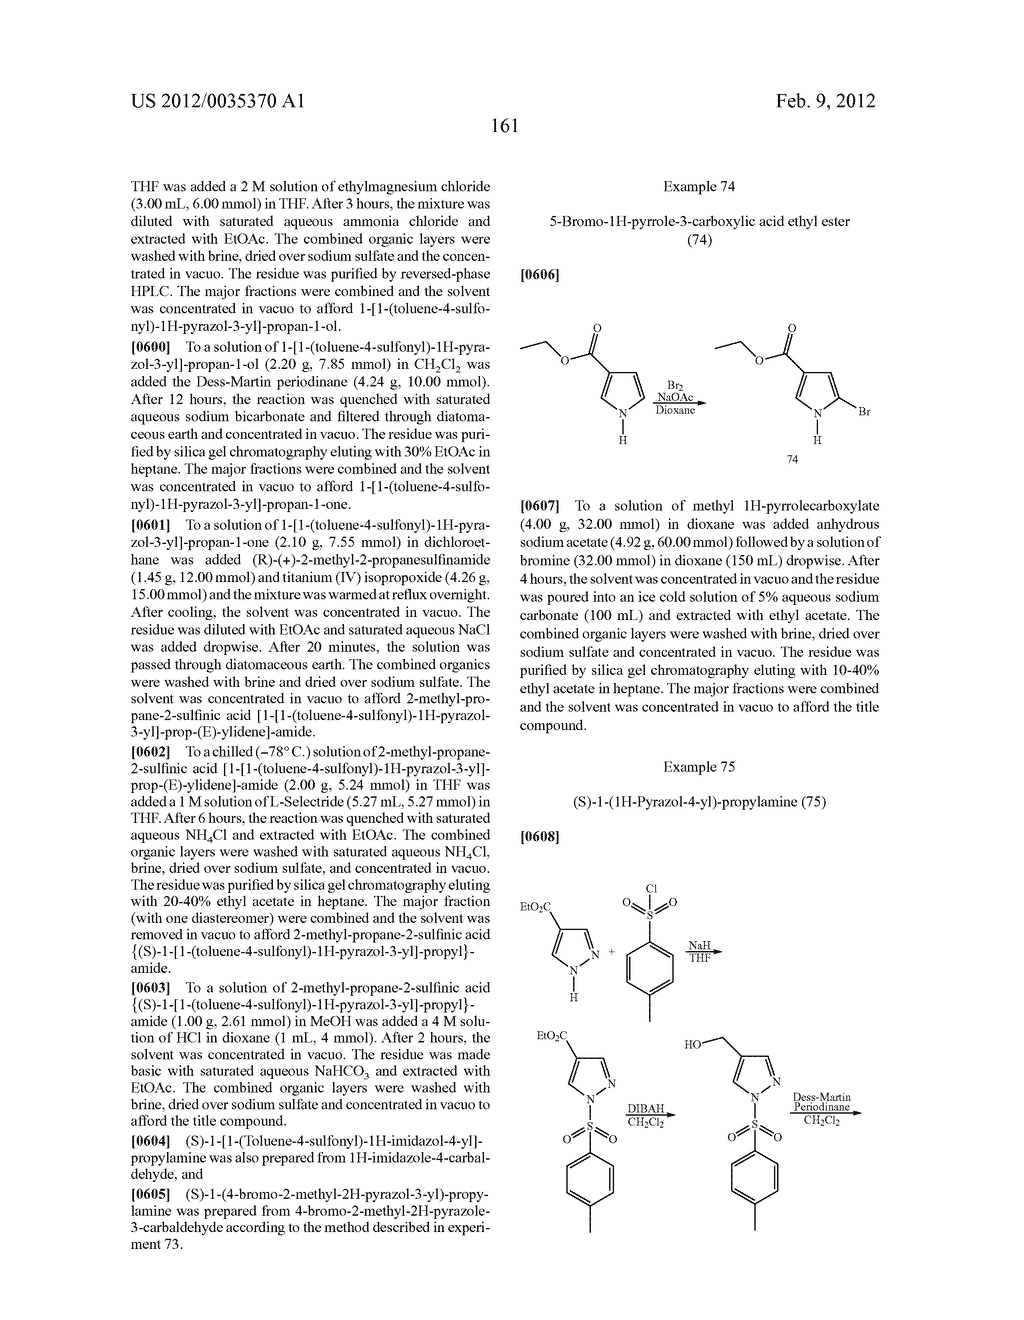 Azaindazole Compounds As CCR1 Receptor Antagonists - diagram, schematic, and image 162